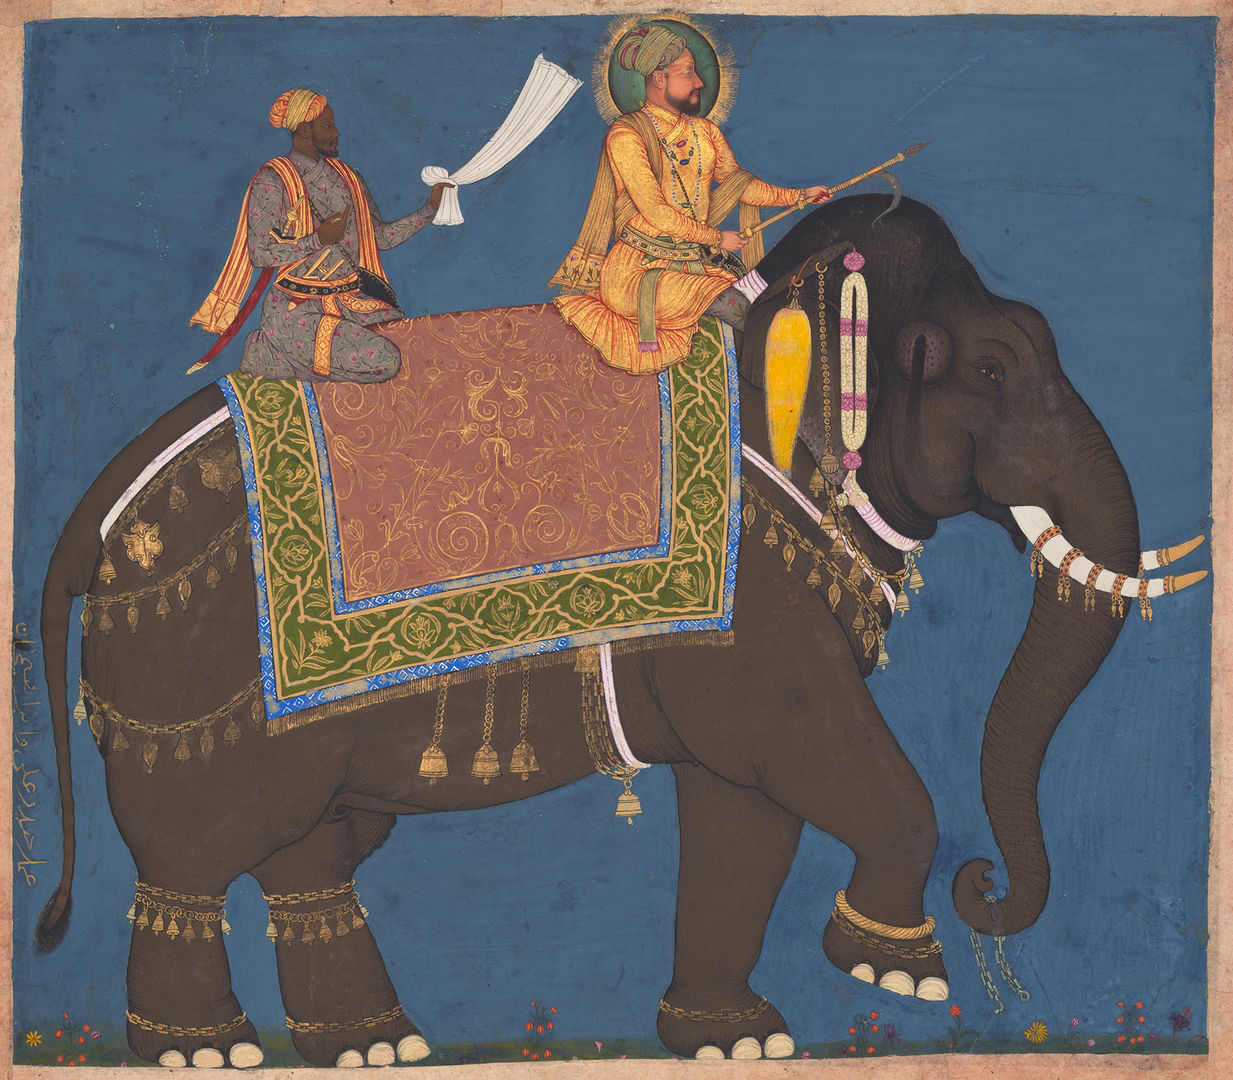 Painting of an elephant adorned with decorative cloth and jewelry with two riders against a blue background